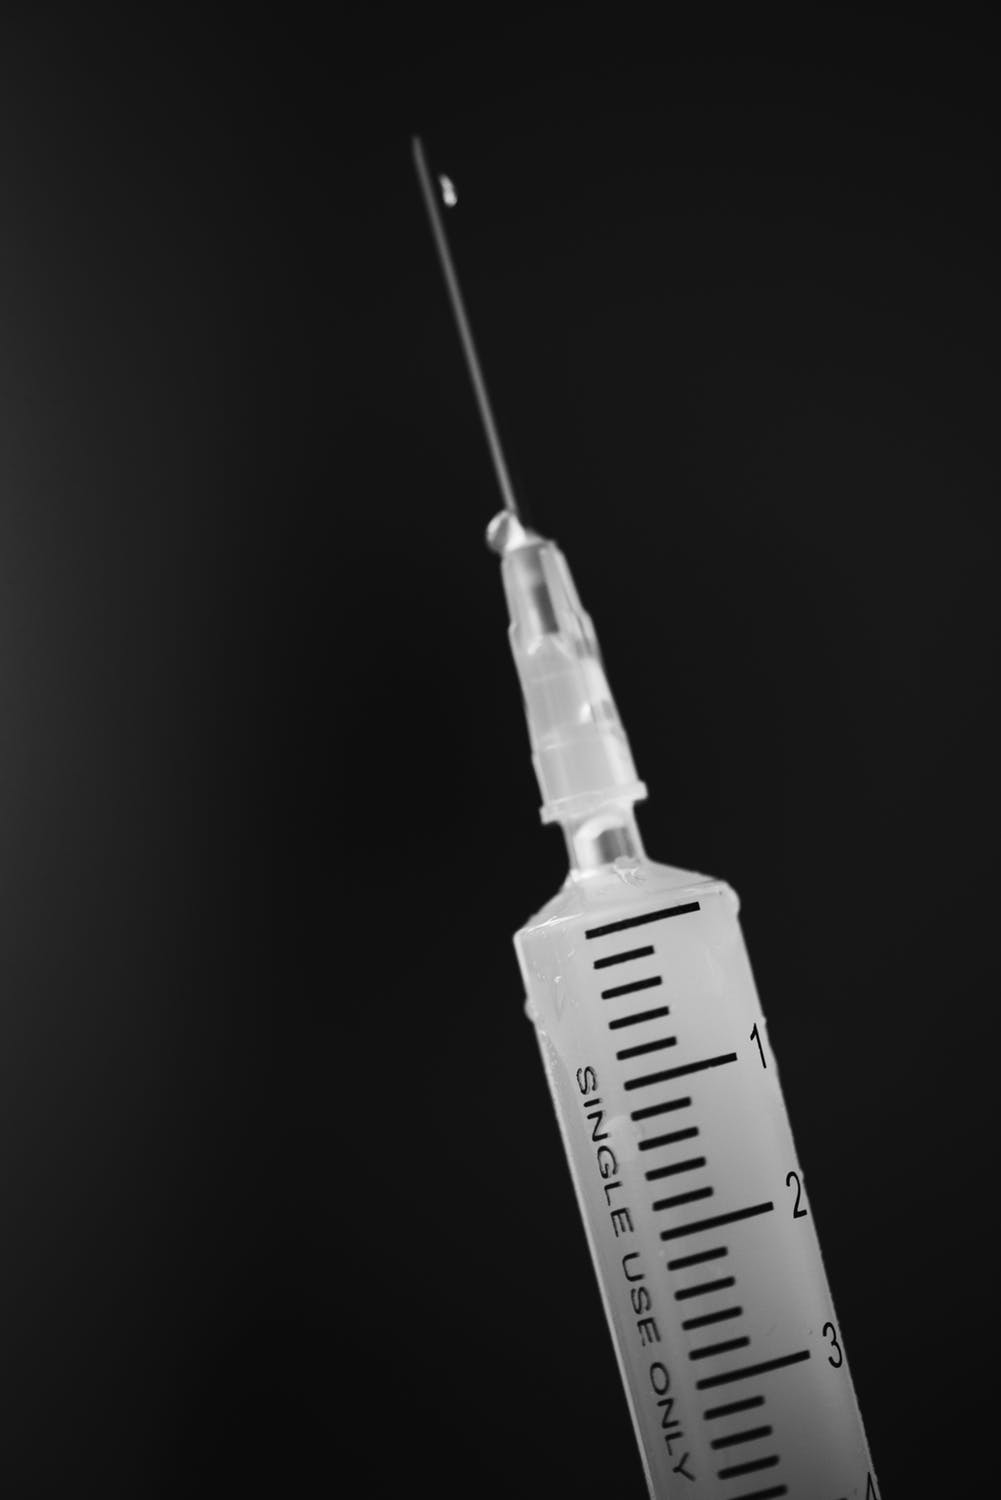 FDA Warns About Dangers of Epidural Steroid Injections for Back Pain